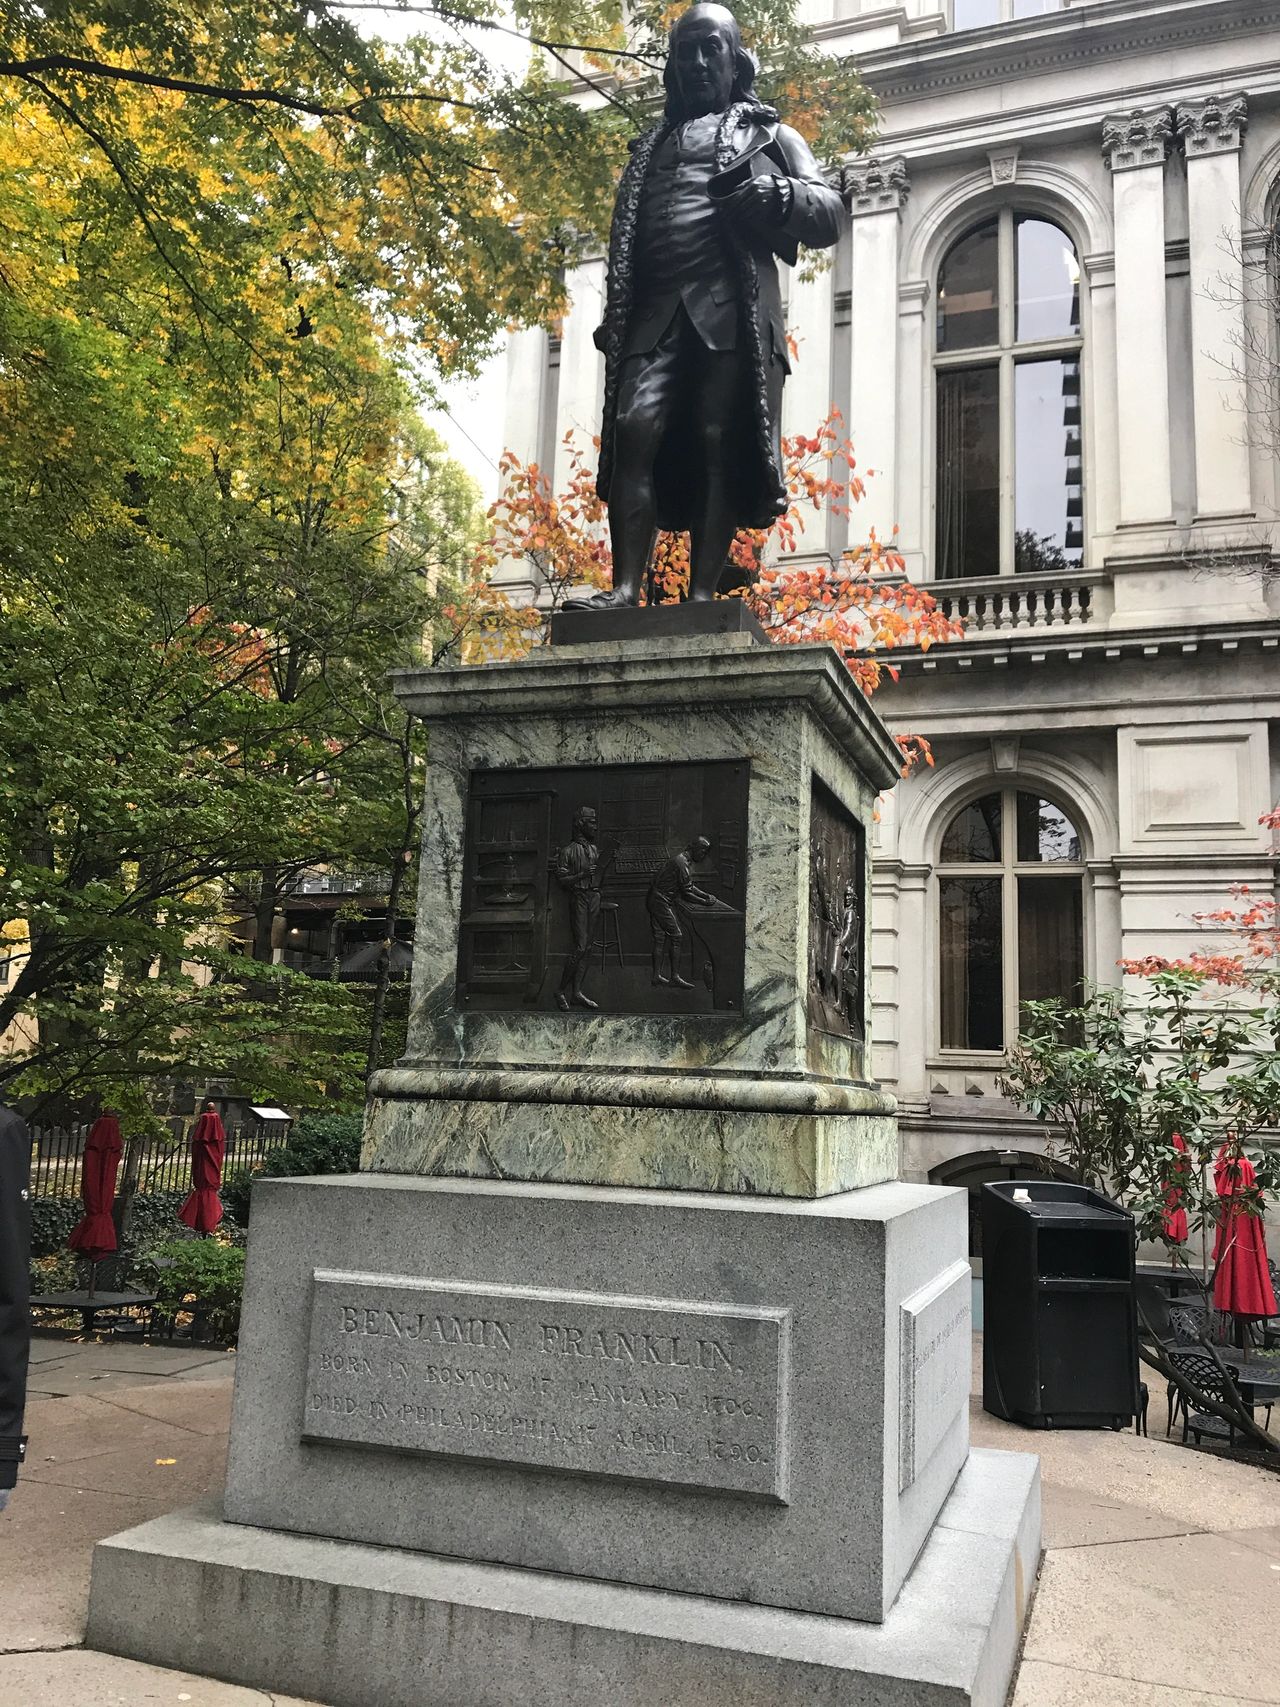 The Statue of Ben Franklin in front of the Old City Hall building 